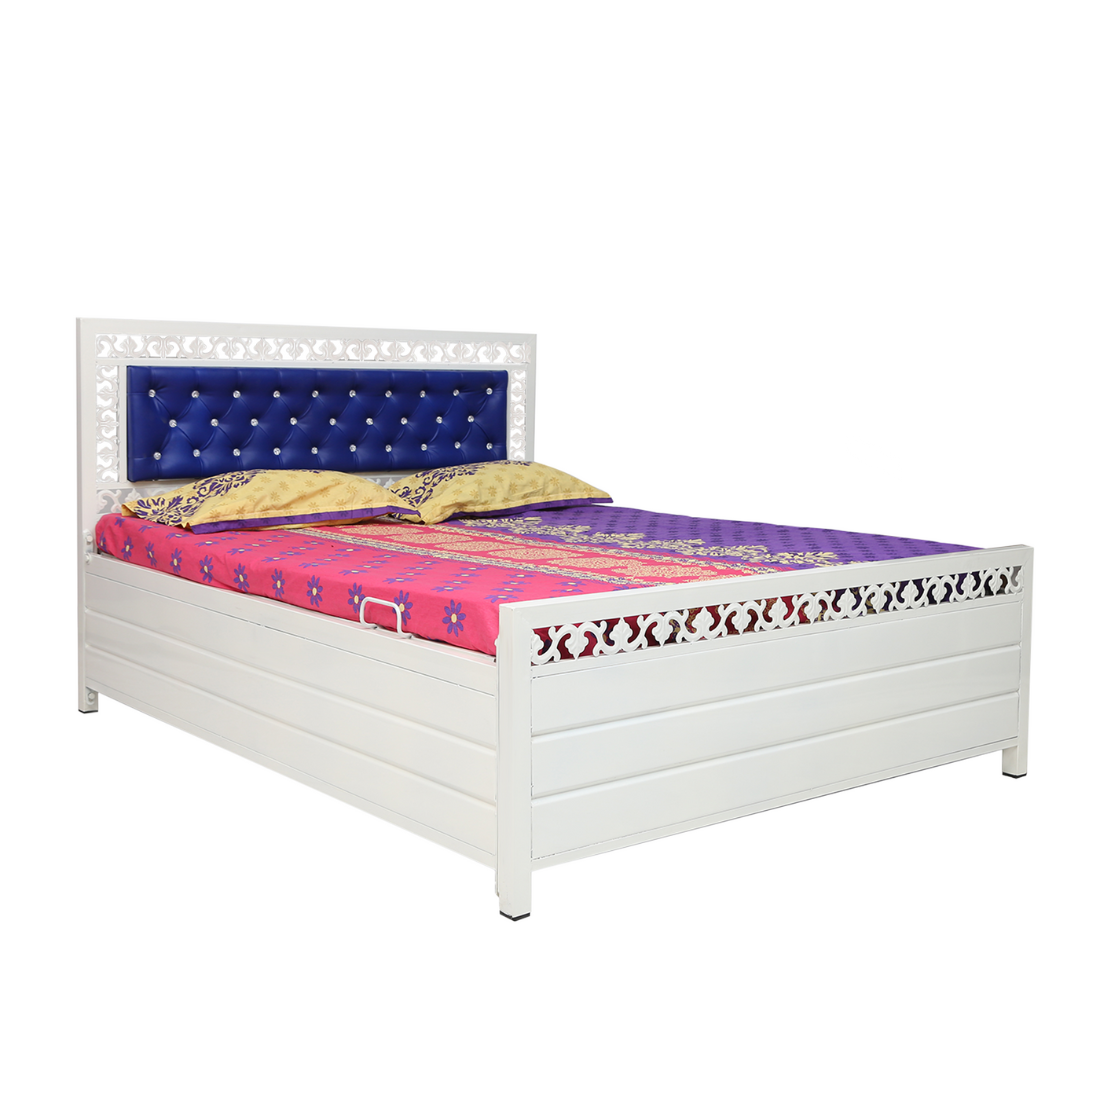 Cuba Hydraulic Storage Double Metal Bed with Blue Cushion Headrest (Color - White)